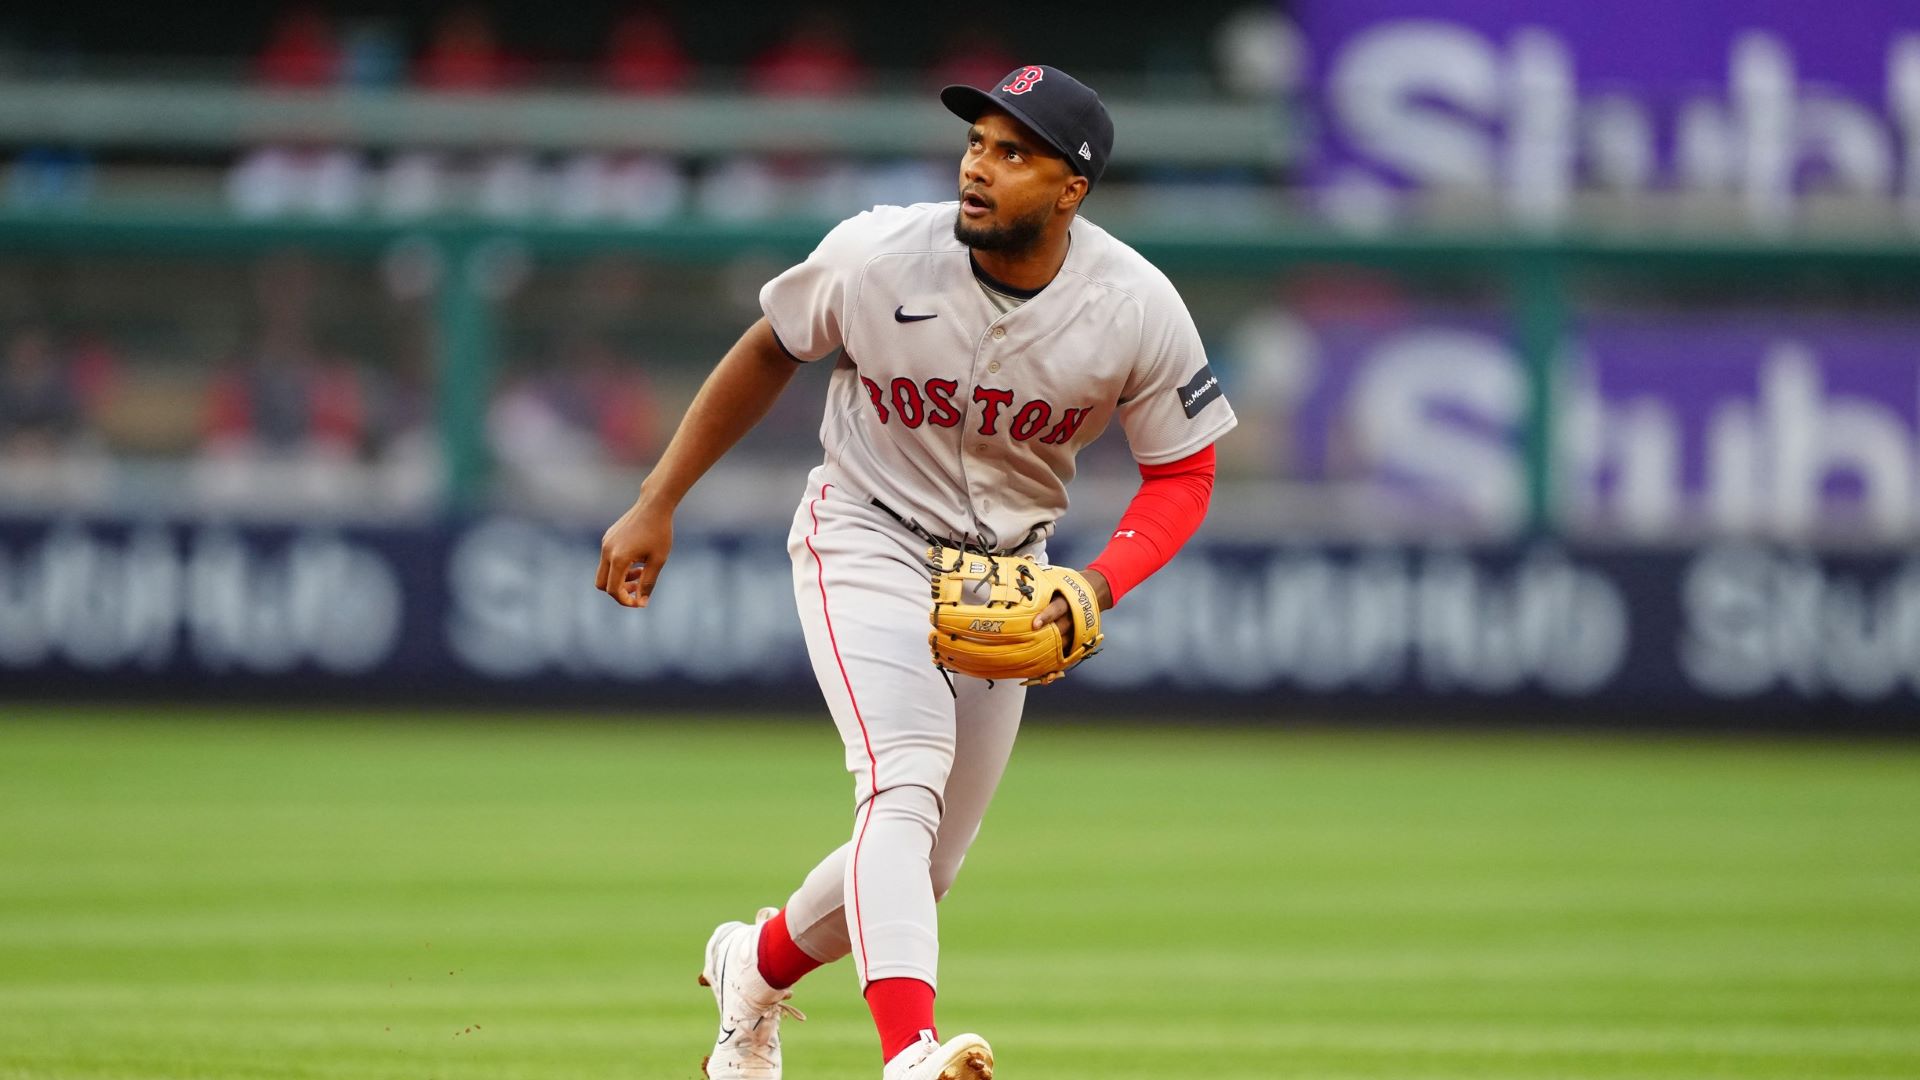 Pablo Reyes' Grand Slam Extends Red Sox City Connect Win Streak